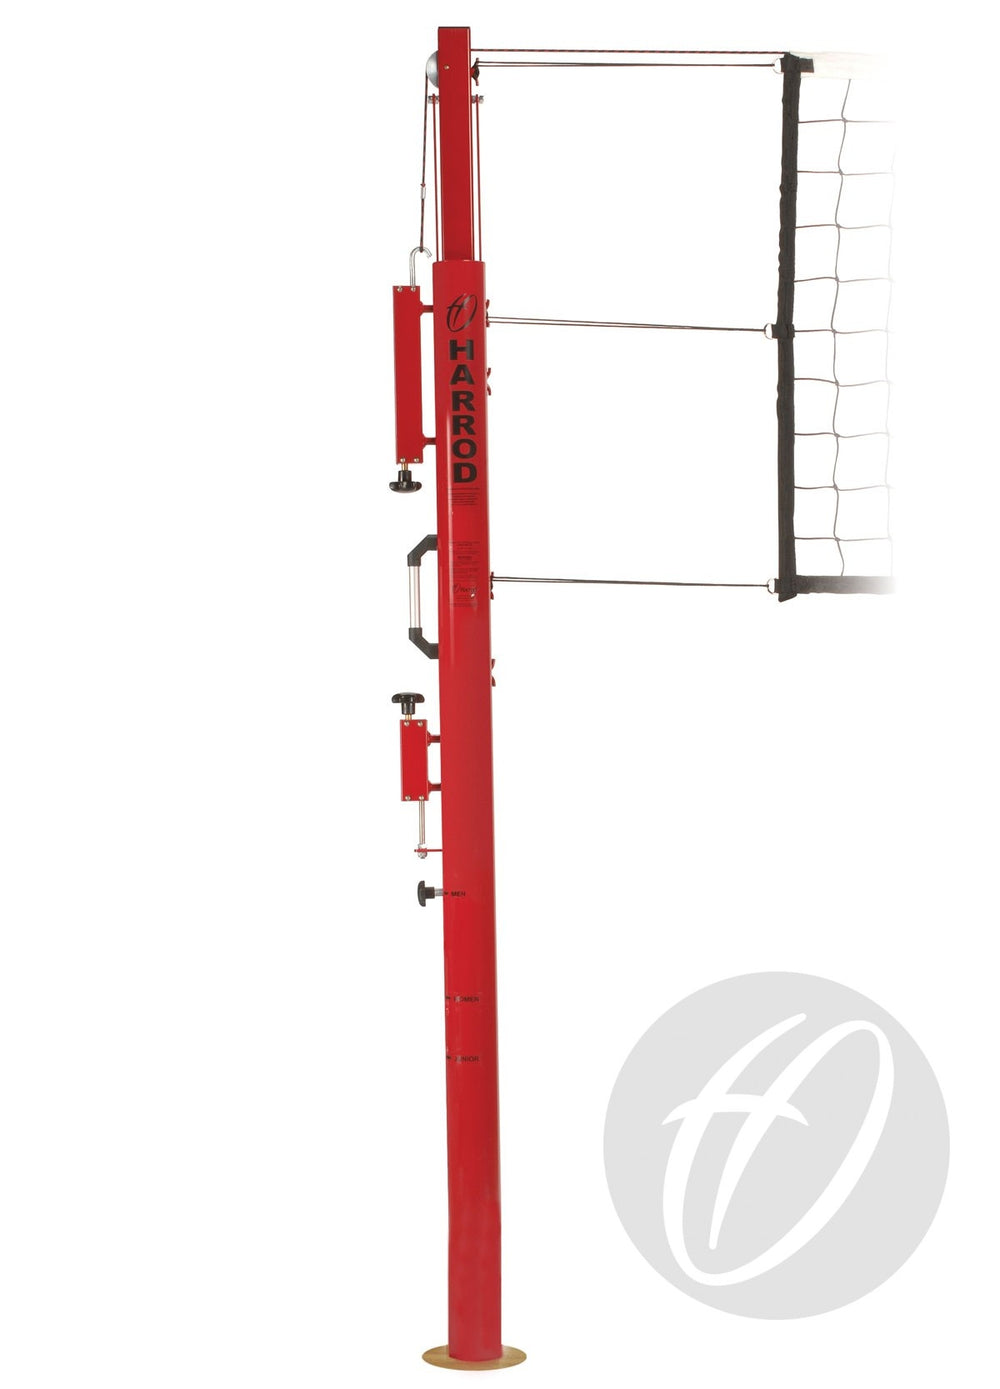 Socketed Competition Telescopic Volleyball Posts